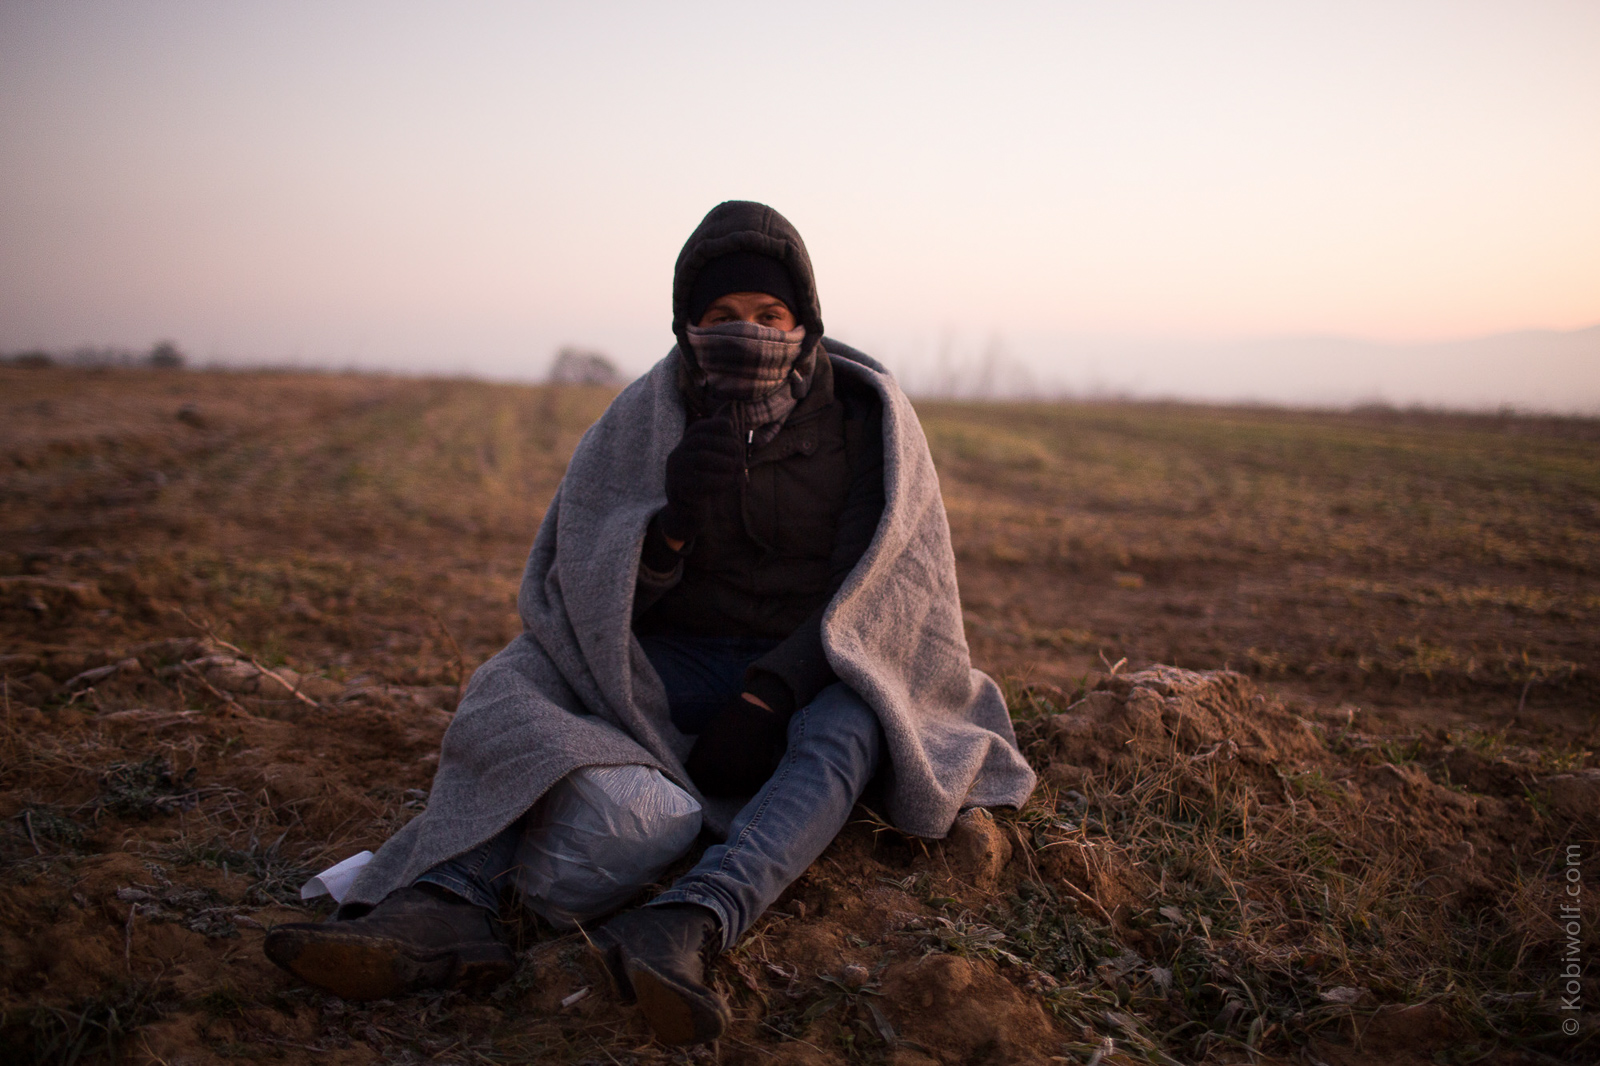 Syrian refugee gathers his strength after 5 km walk from the train station on the Macedonia border and into Serbia.